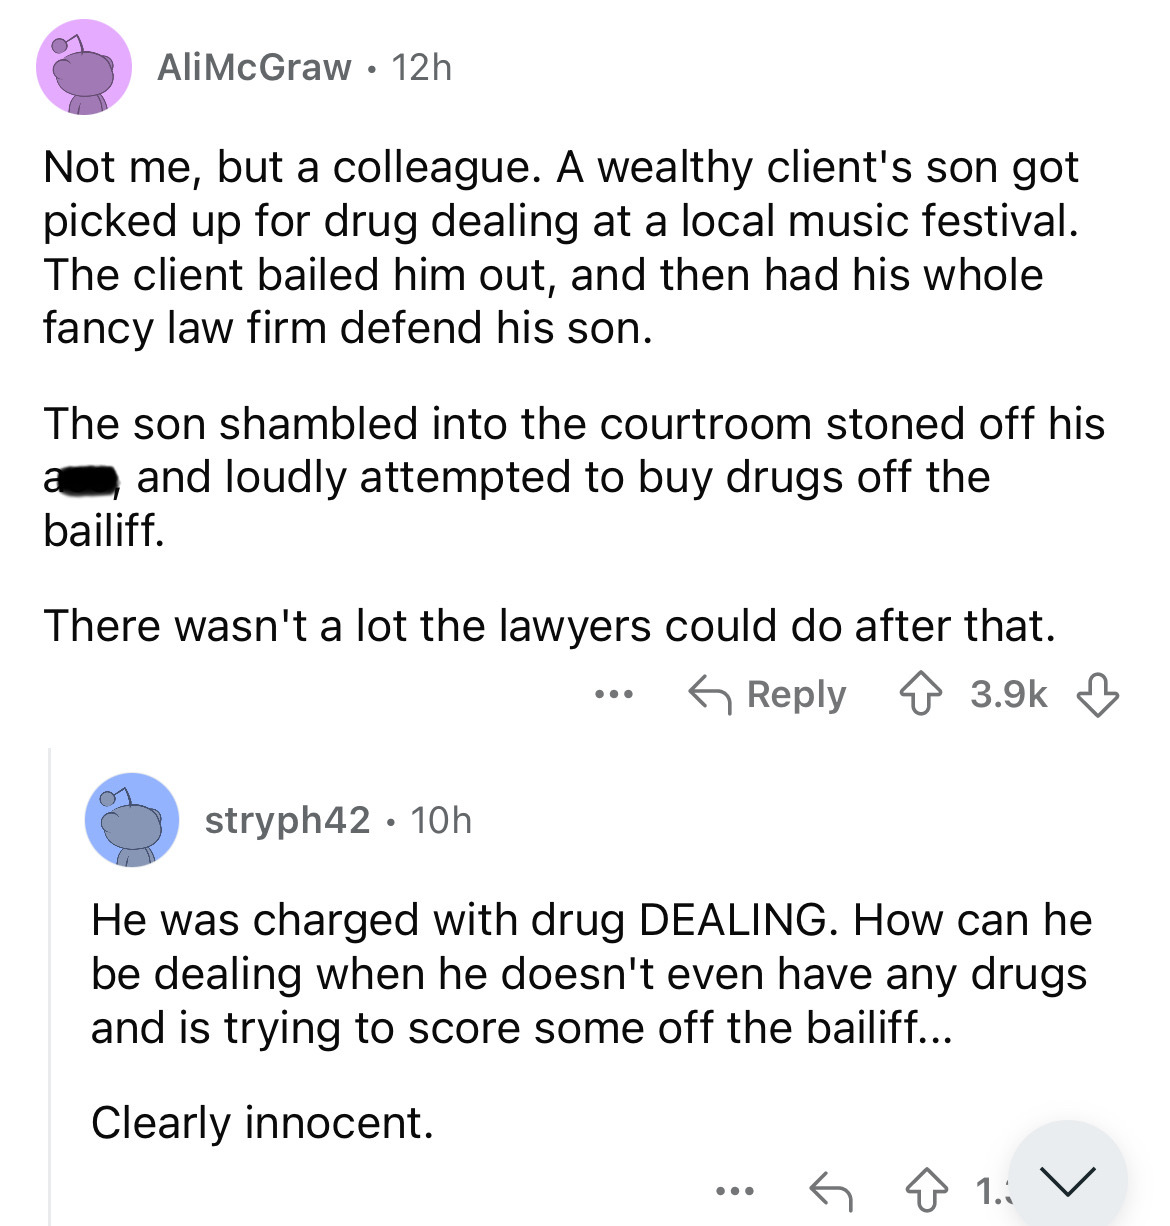 screenshot - AliMcGraw 12h . Not me, but a colleague. A wealthy client's son got picked up for drug dealing at a local music festival. The client bailed him out, and then had his whole fancy law firm defend his son. The son shambled into the courtroom sto